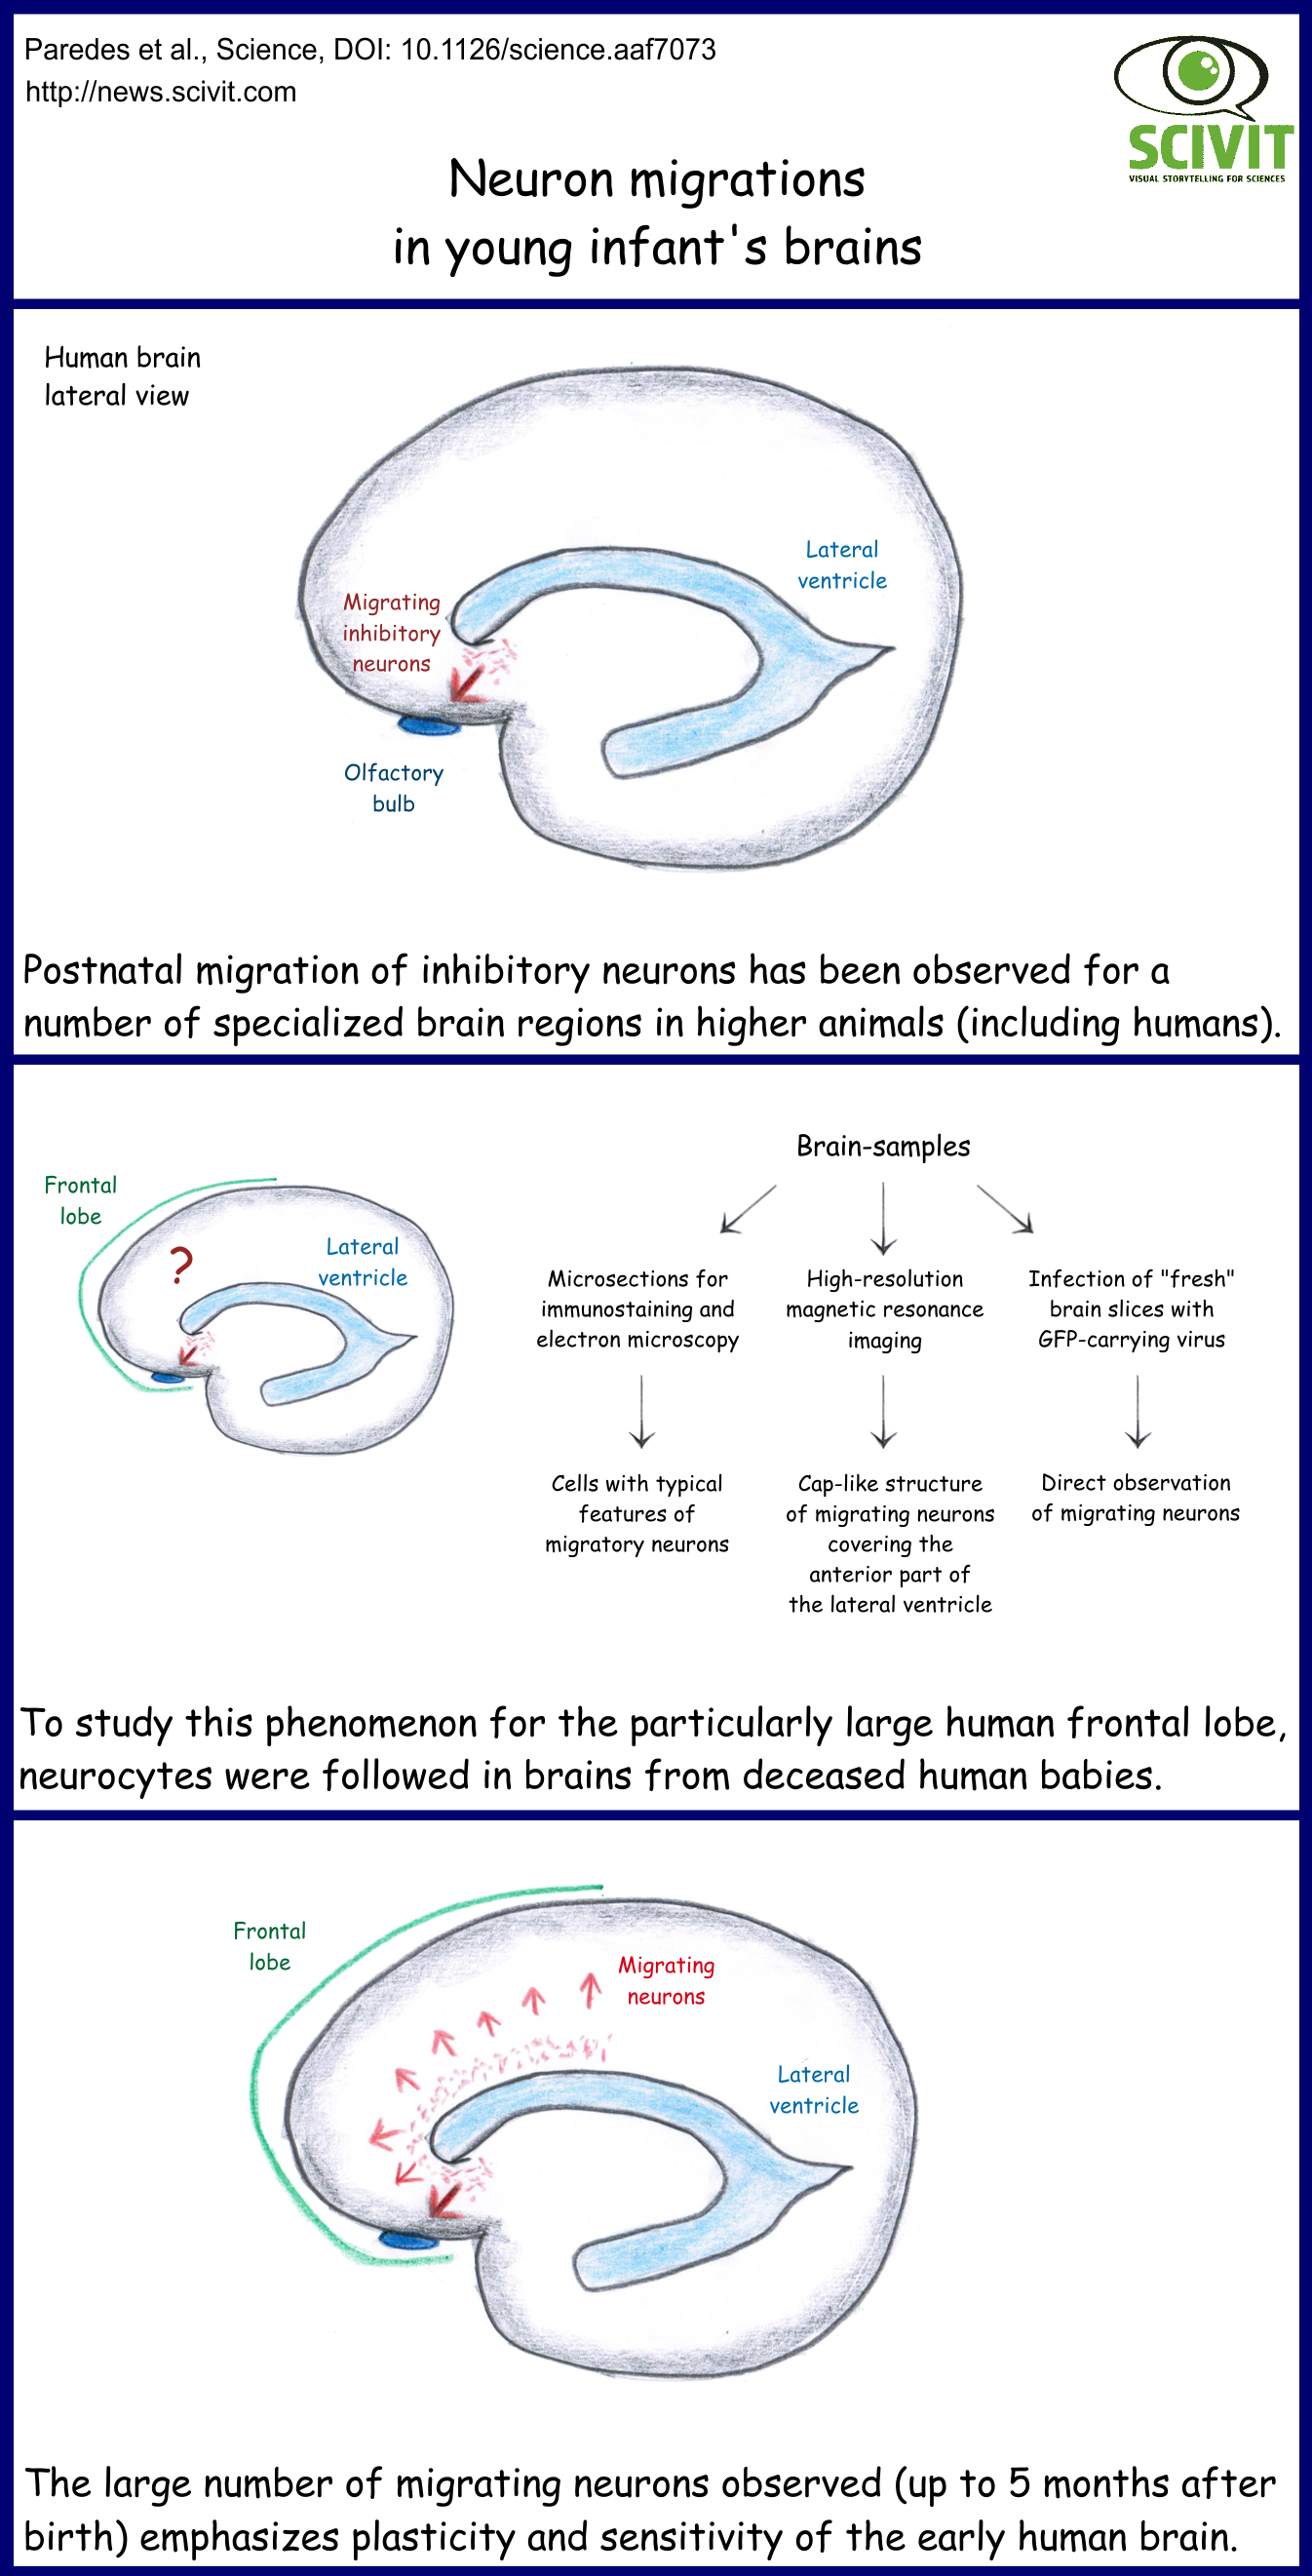  Neuron migrations in young infant's brains